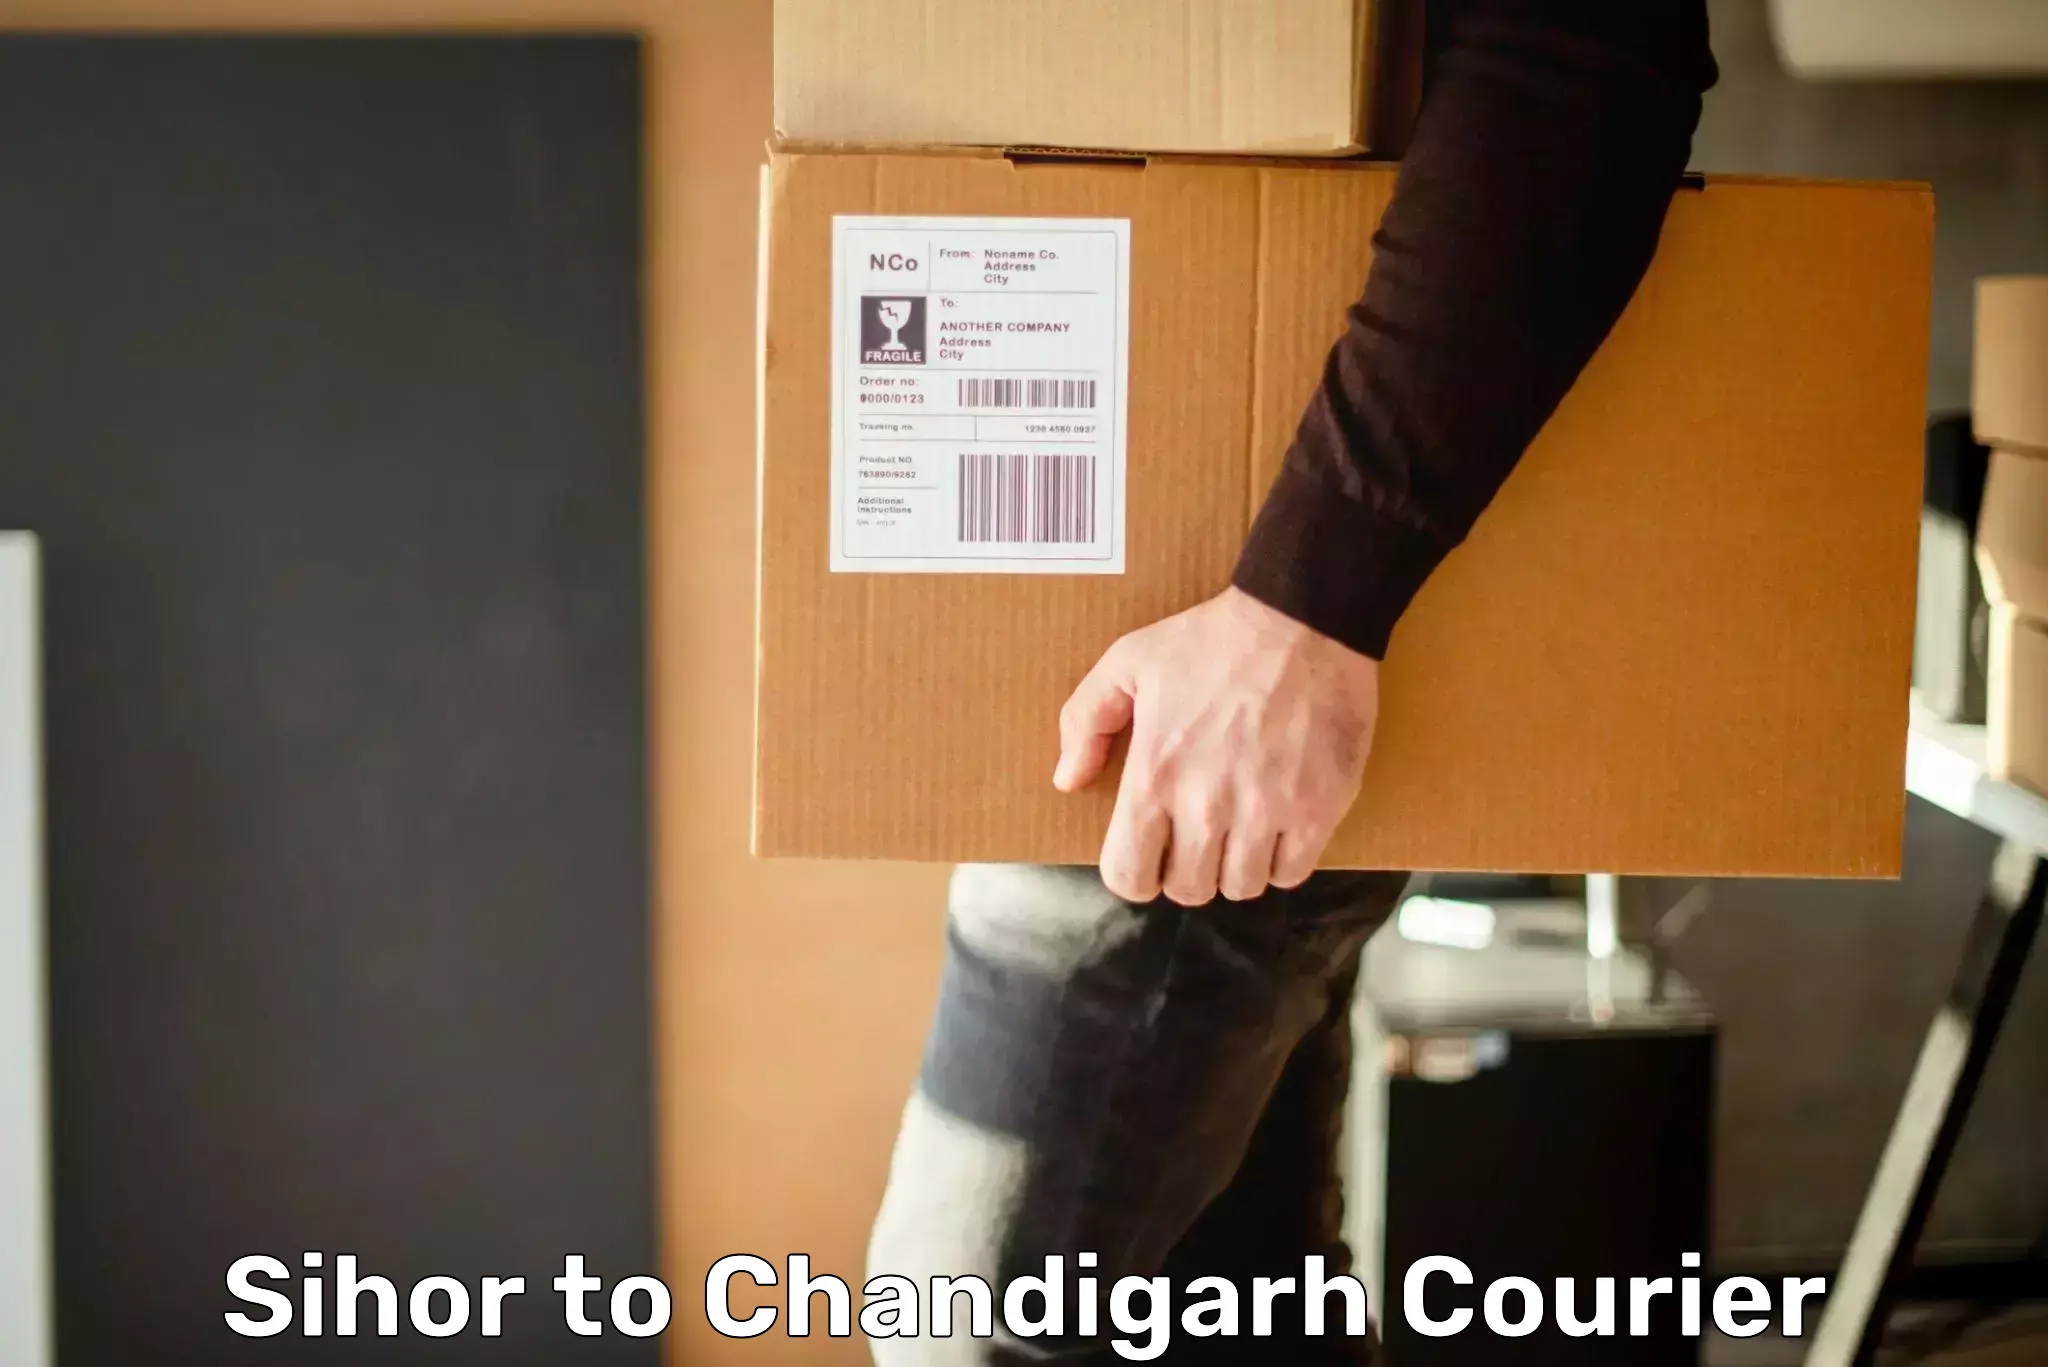 Affordable parcel service Sihor to Chandigarh